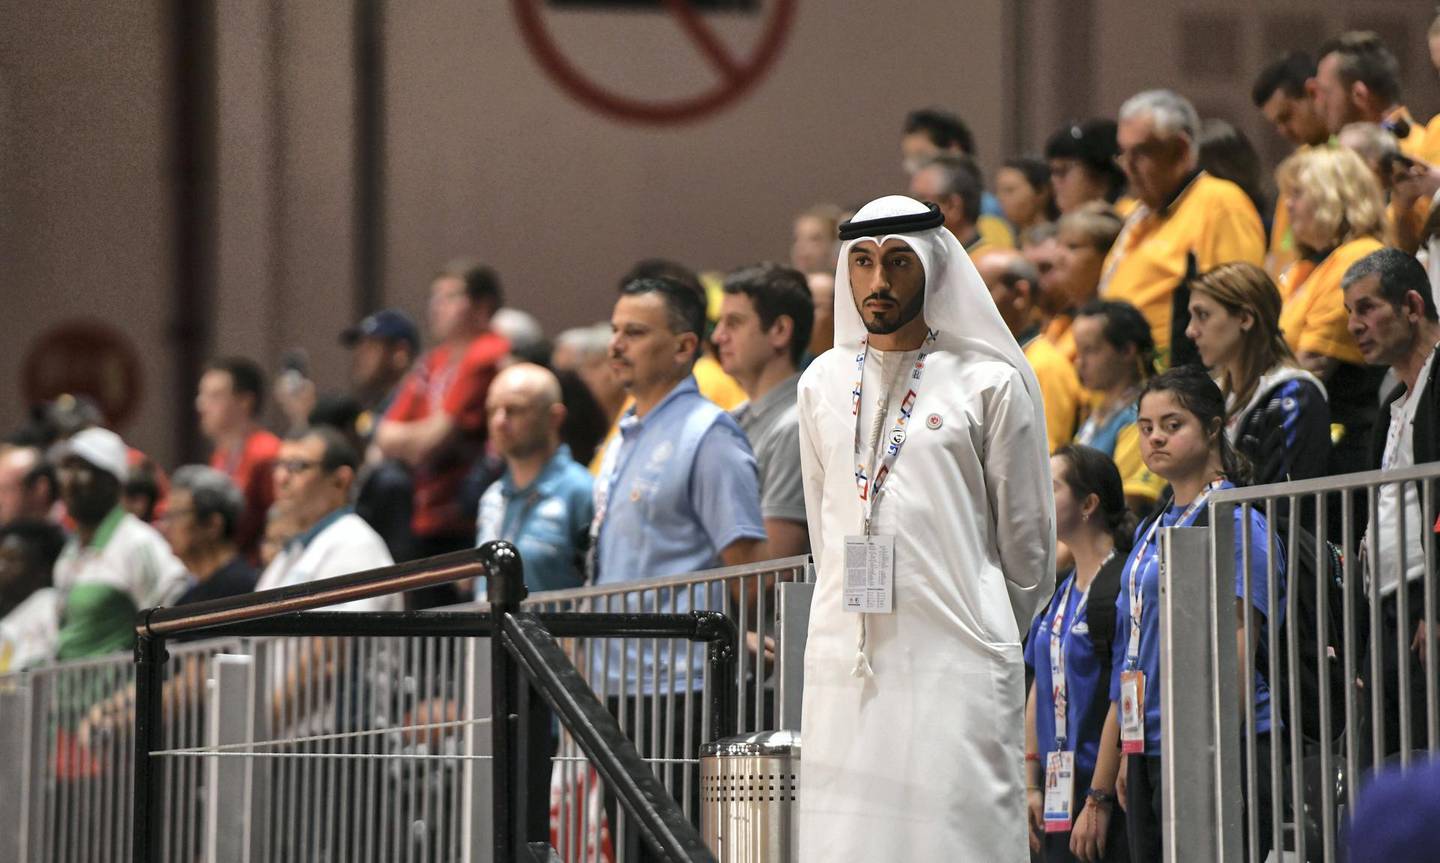 Abu Dhabi, United Arab Emirates - Moment of silence for the recent attacks in Christ Church at the New Zealand vs Australia basketball game, Special Olympics at ADNEC. Khushnum Bhandari for The National
